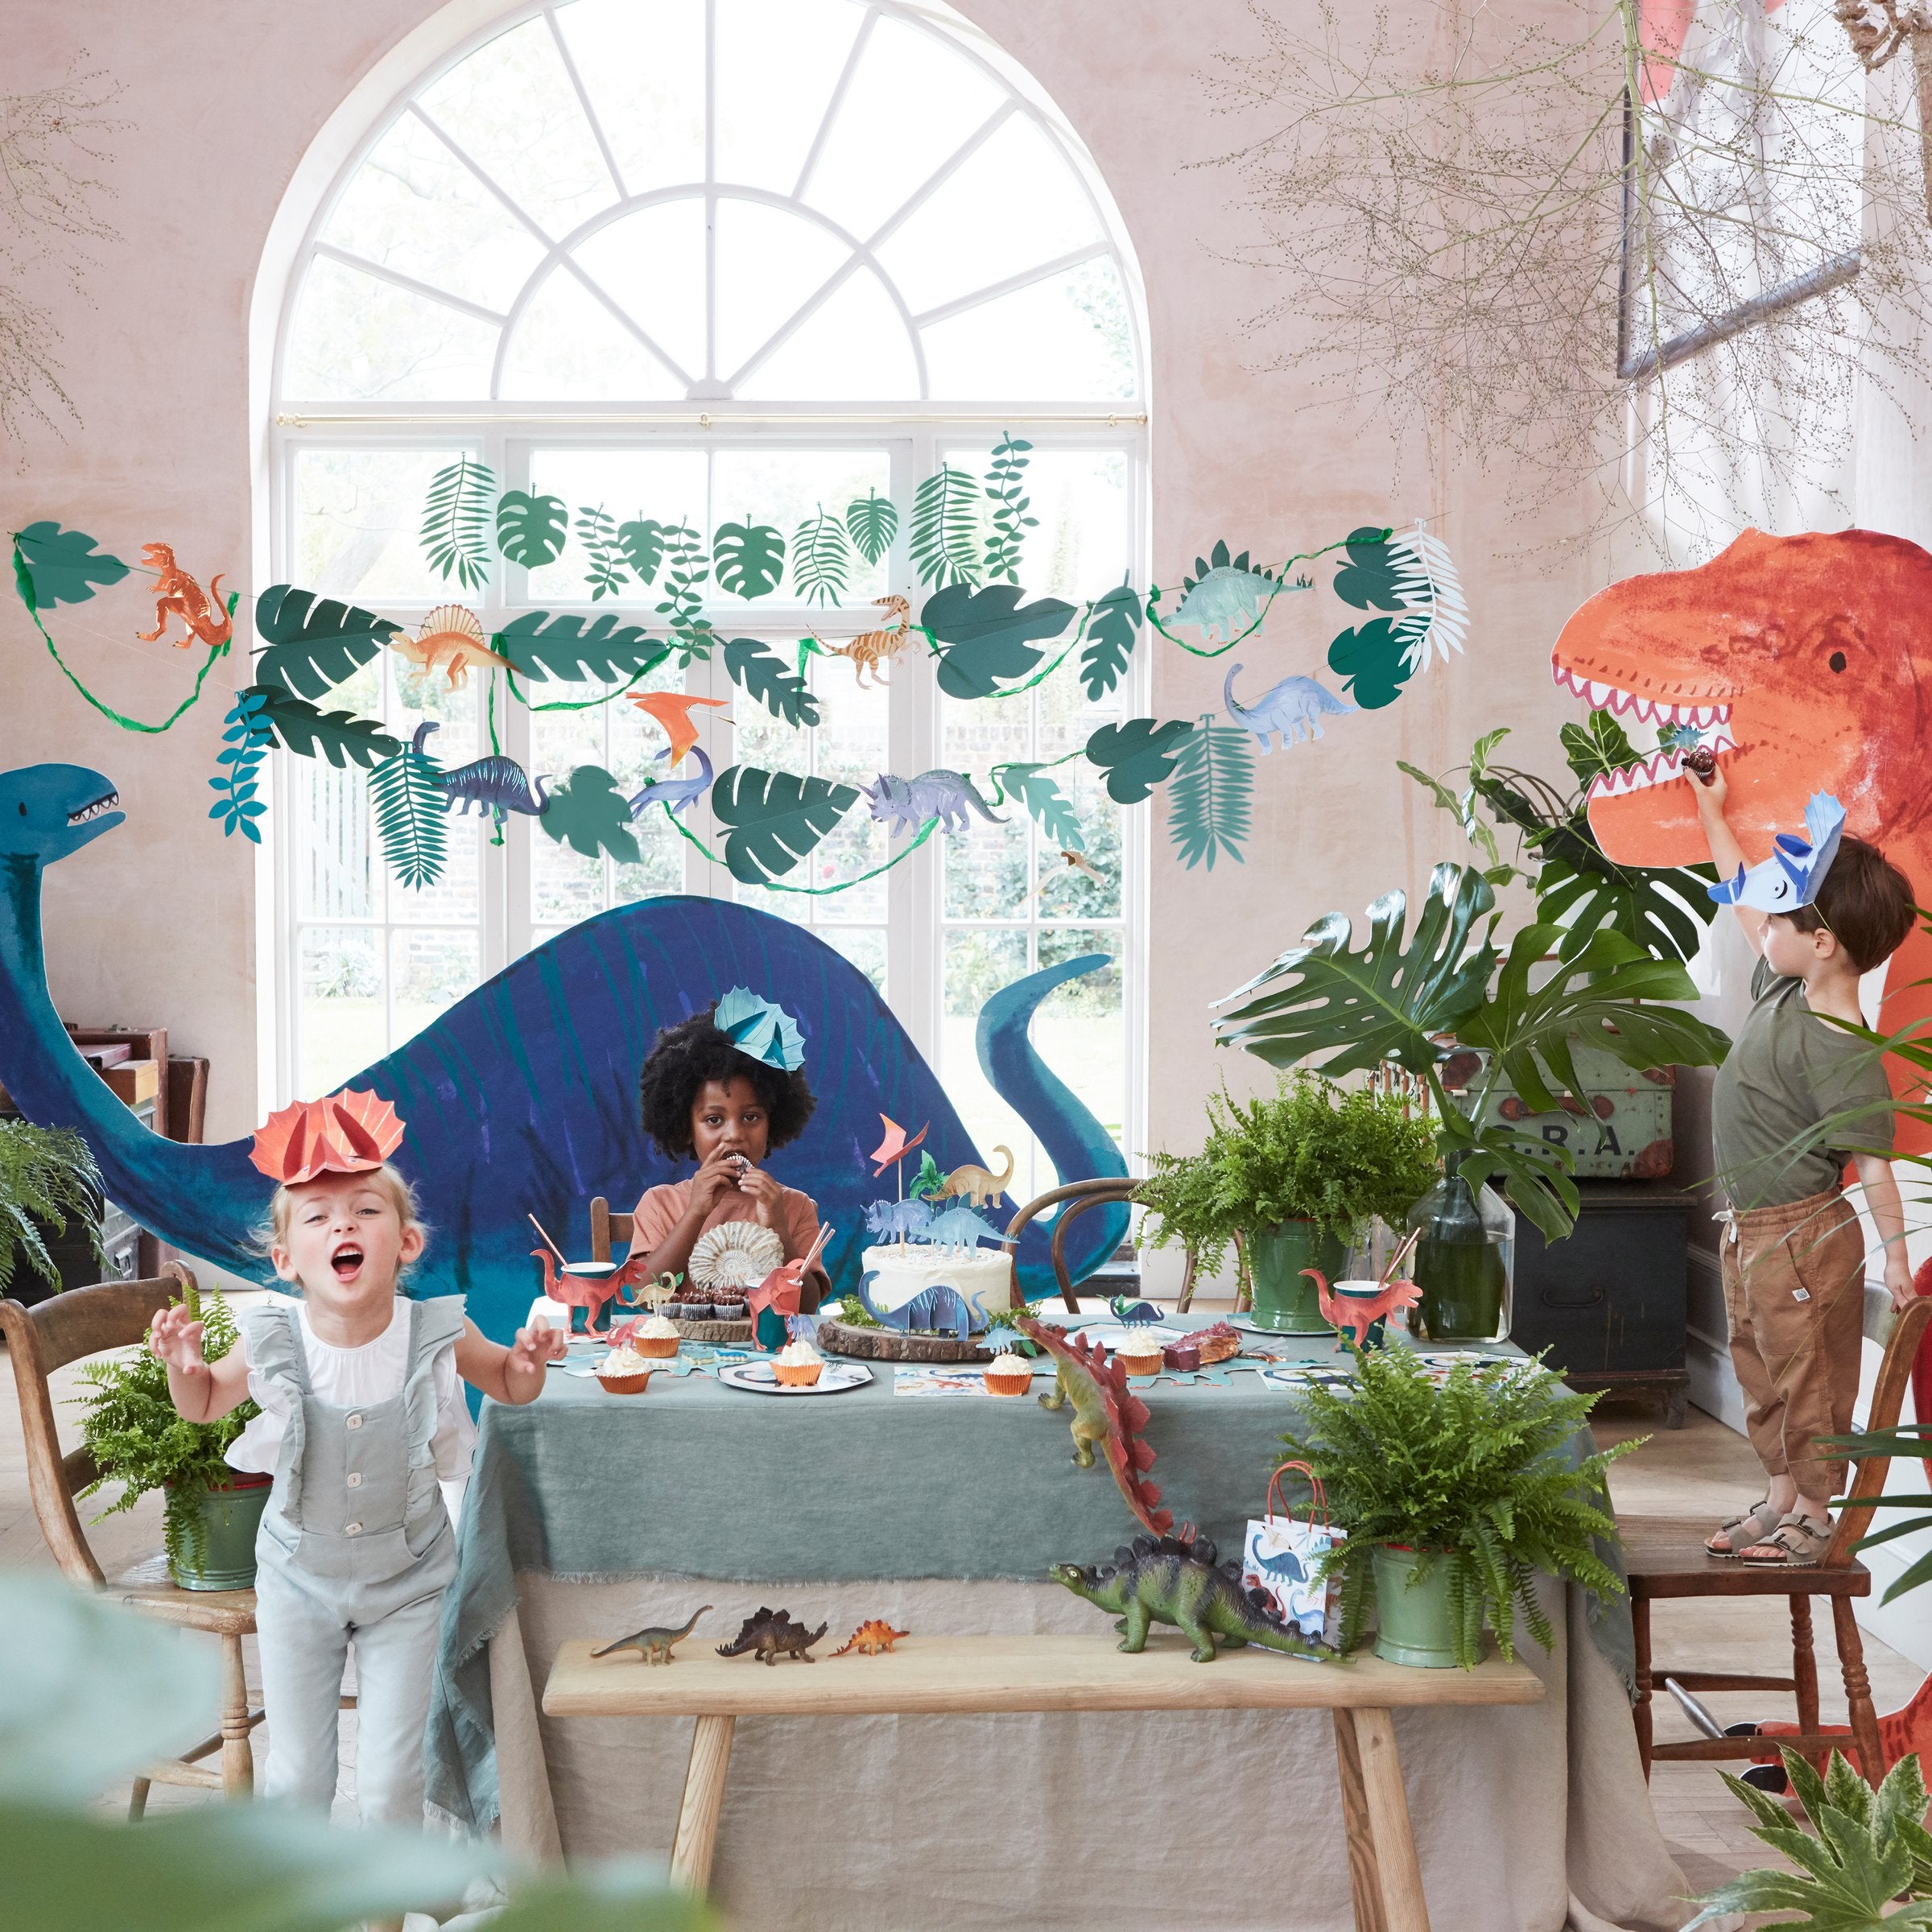 Our large garland, featuring colourful dinosaurs, is perfect for a dinosaur themed party.